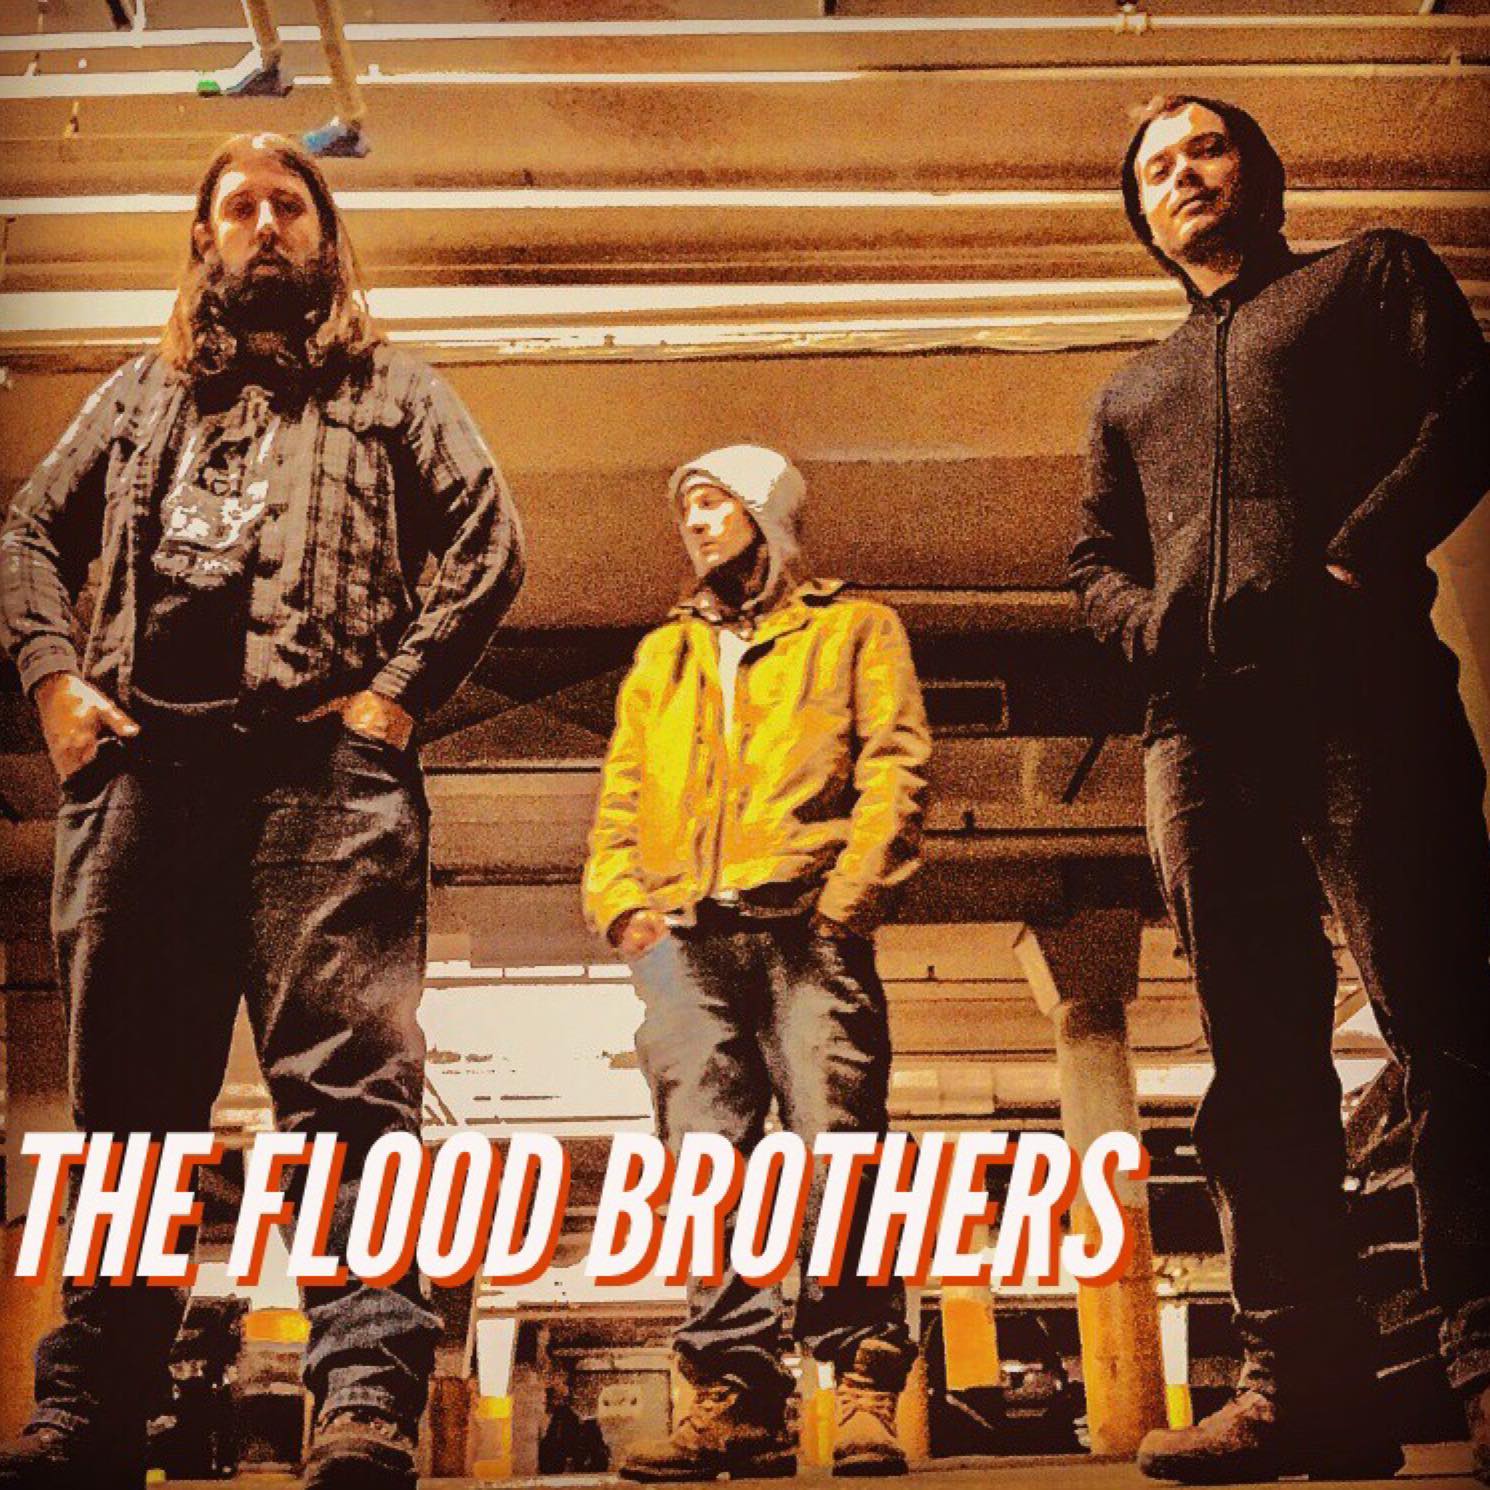 The Flood Brothers shake up The Mission